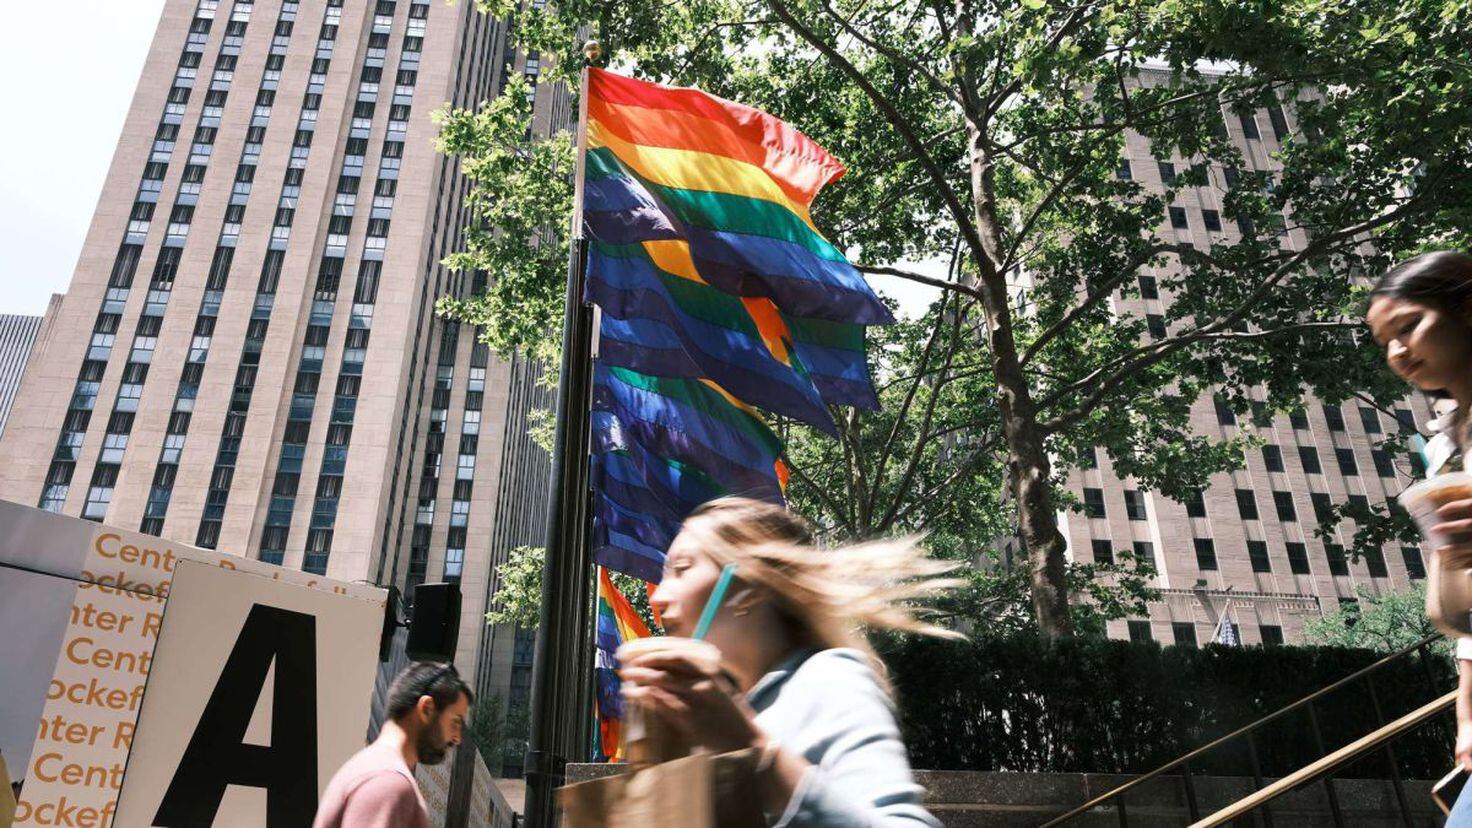 NFL, MLB to join NYC Pride March for first time